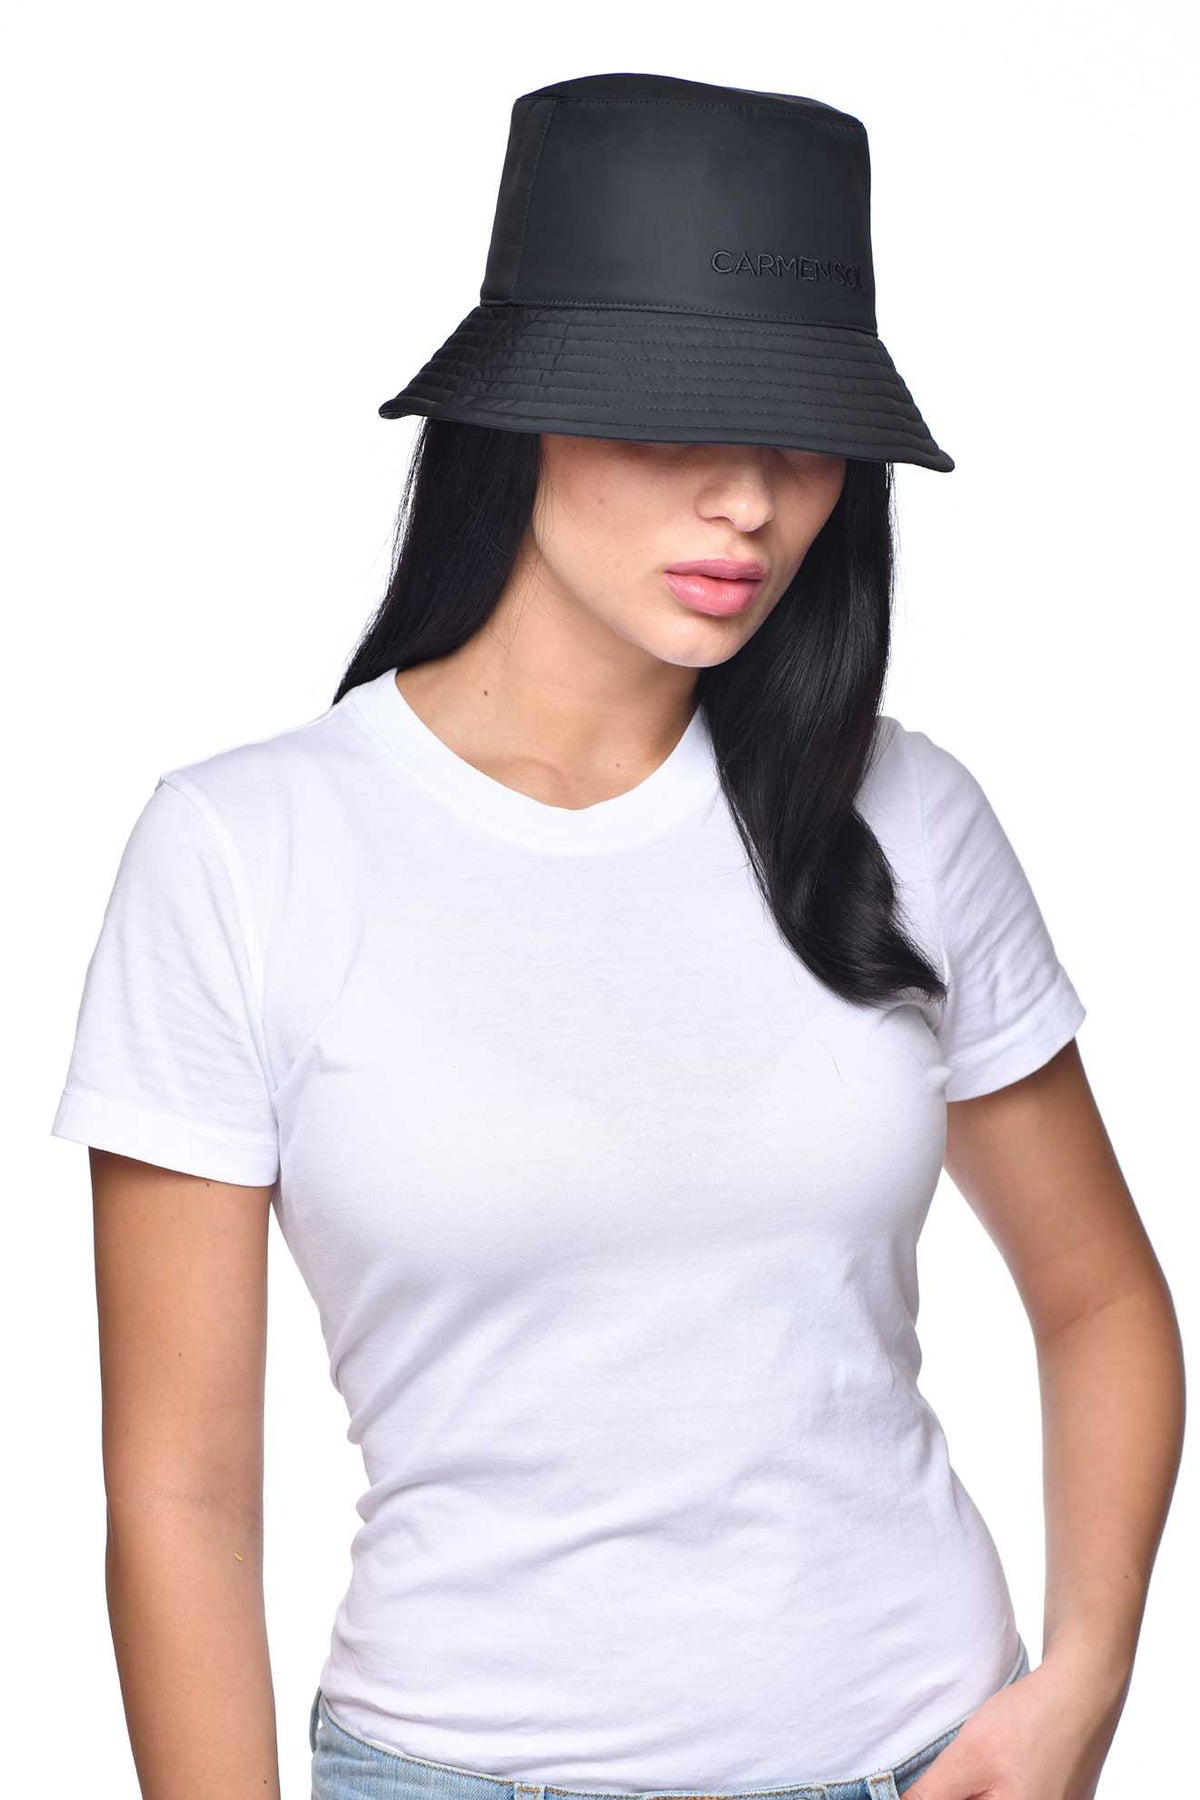 Carmen Sol womens nylon bucket hat outfit in color black